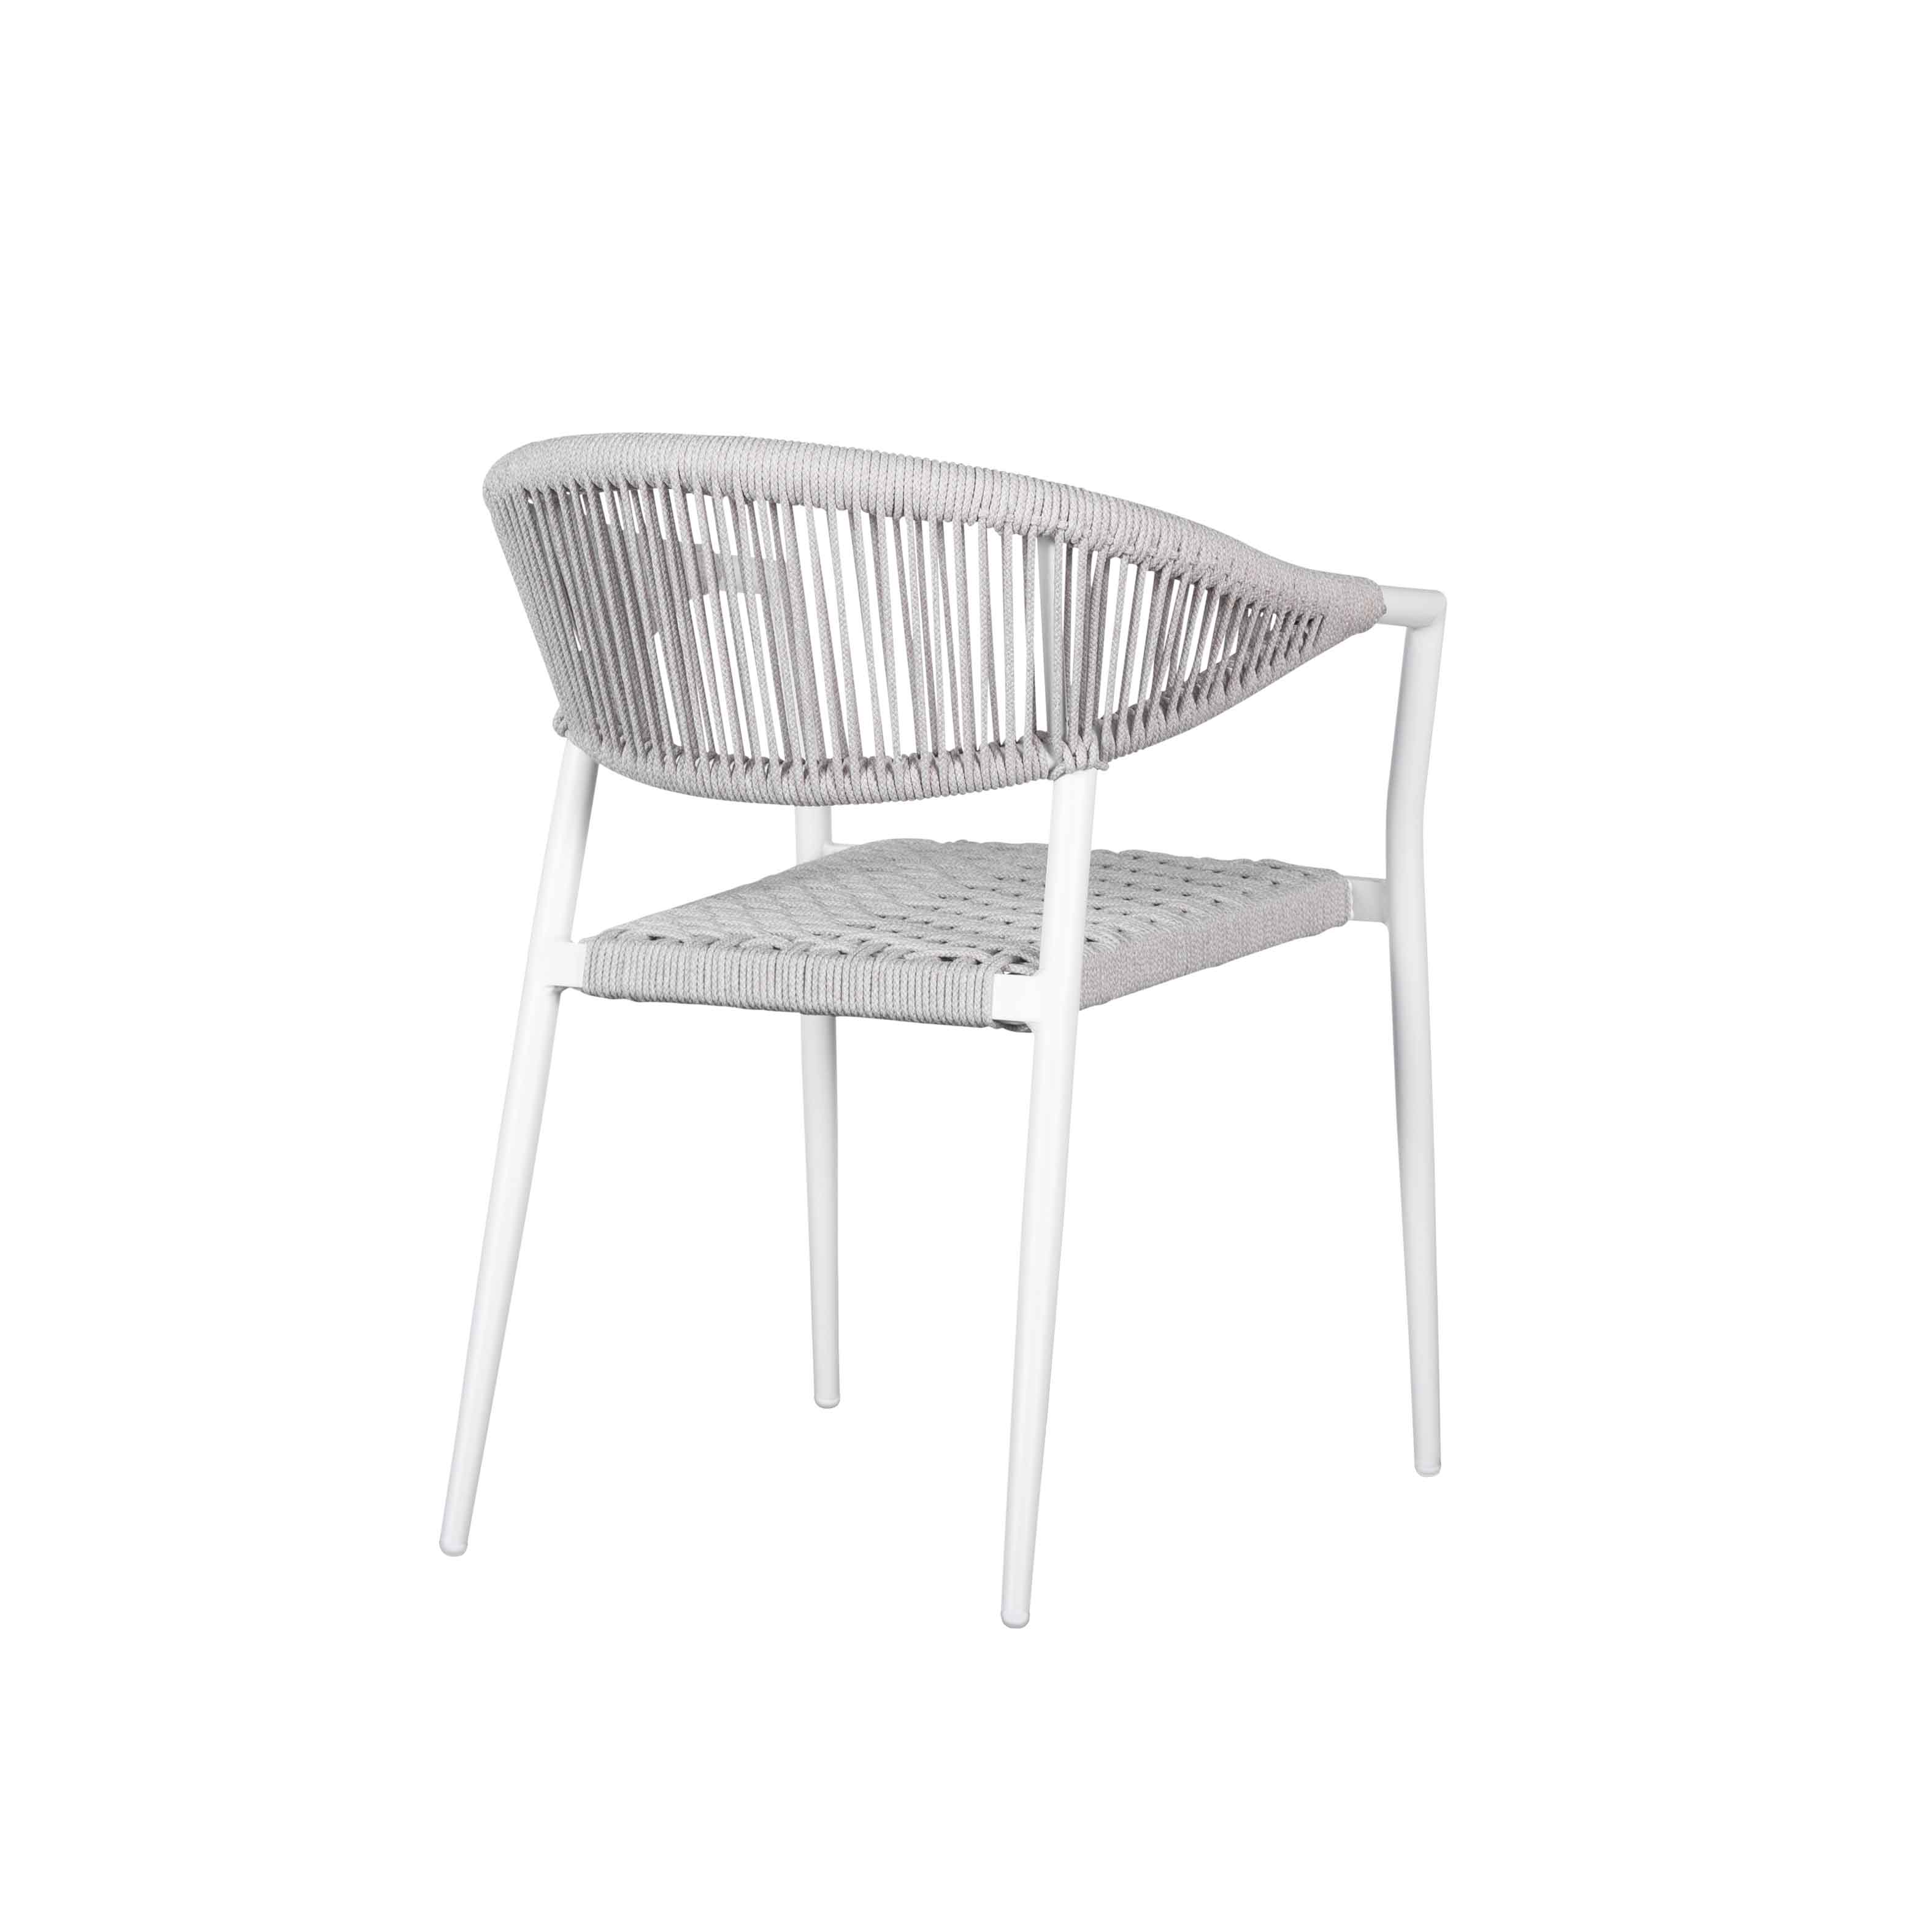 Camila rope dining chair S8